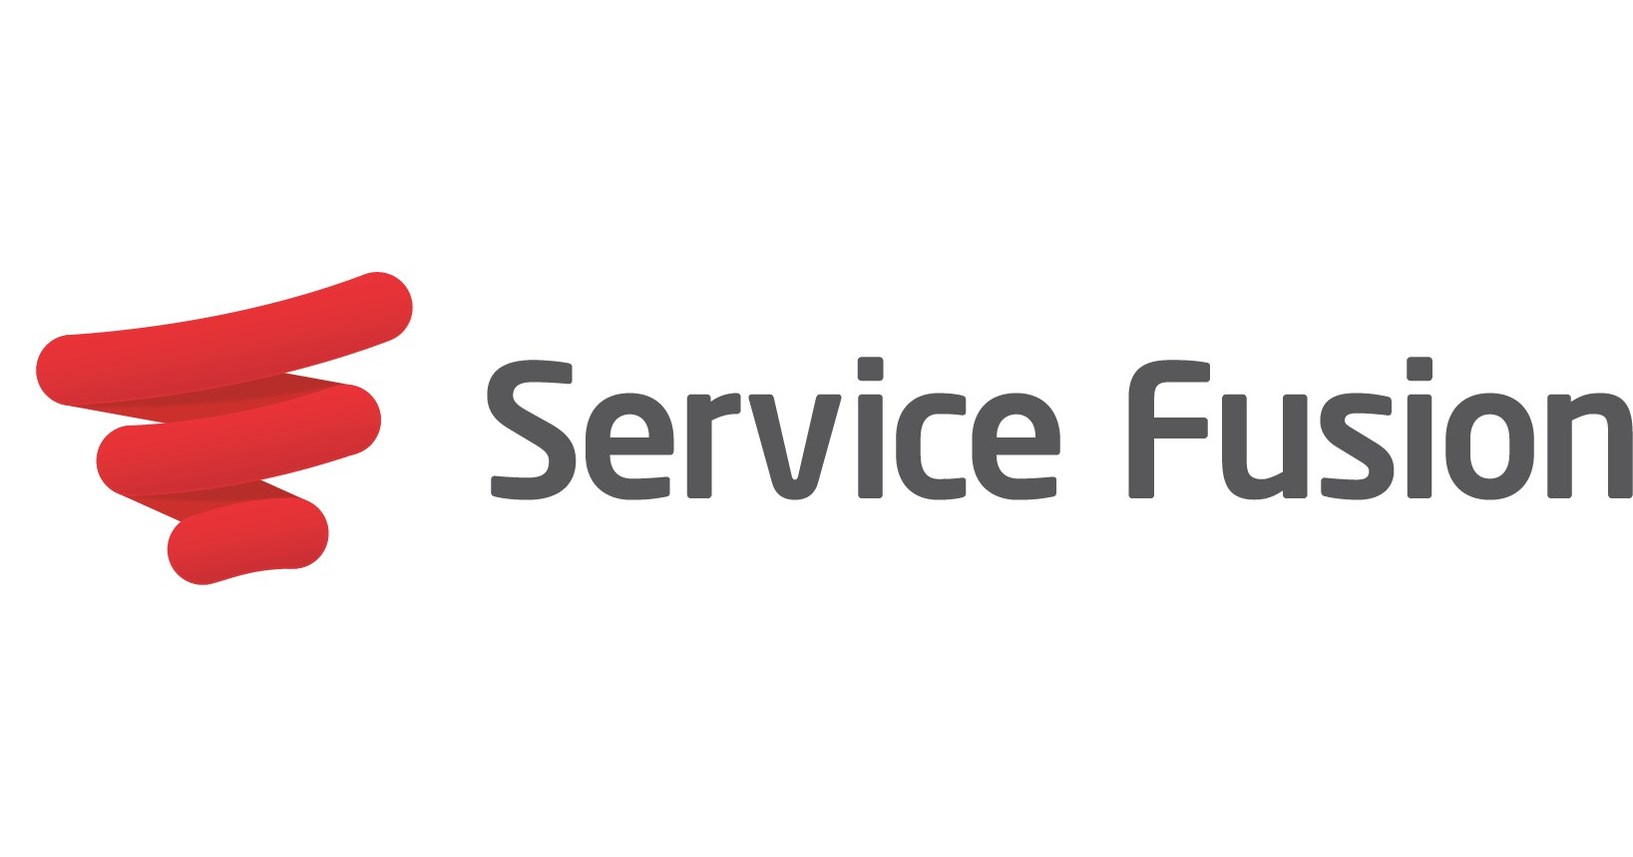 Service Fusion Offers Free VoIP Service Until May To Support Customers'  Remote Work Needs